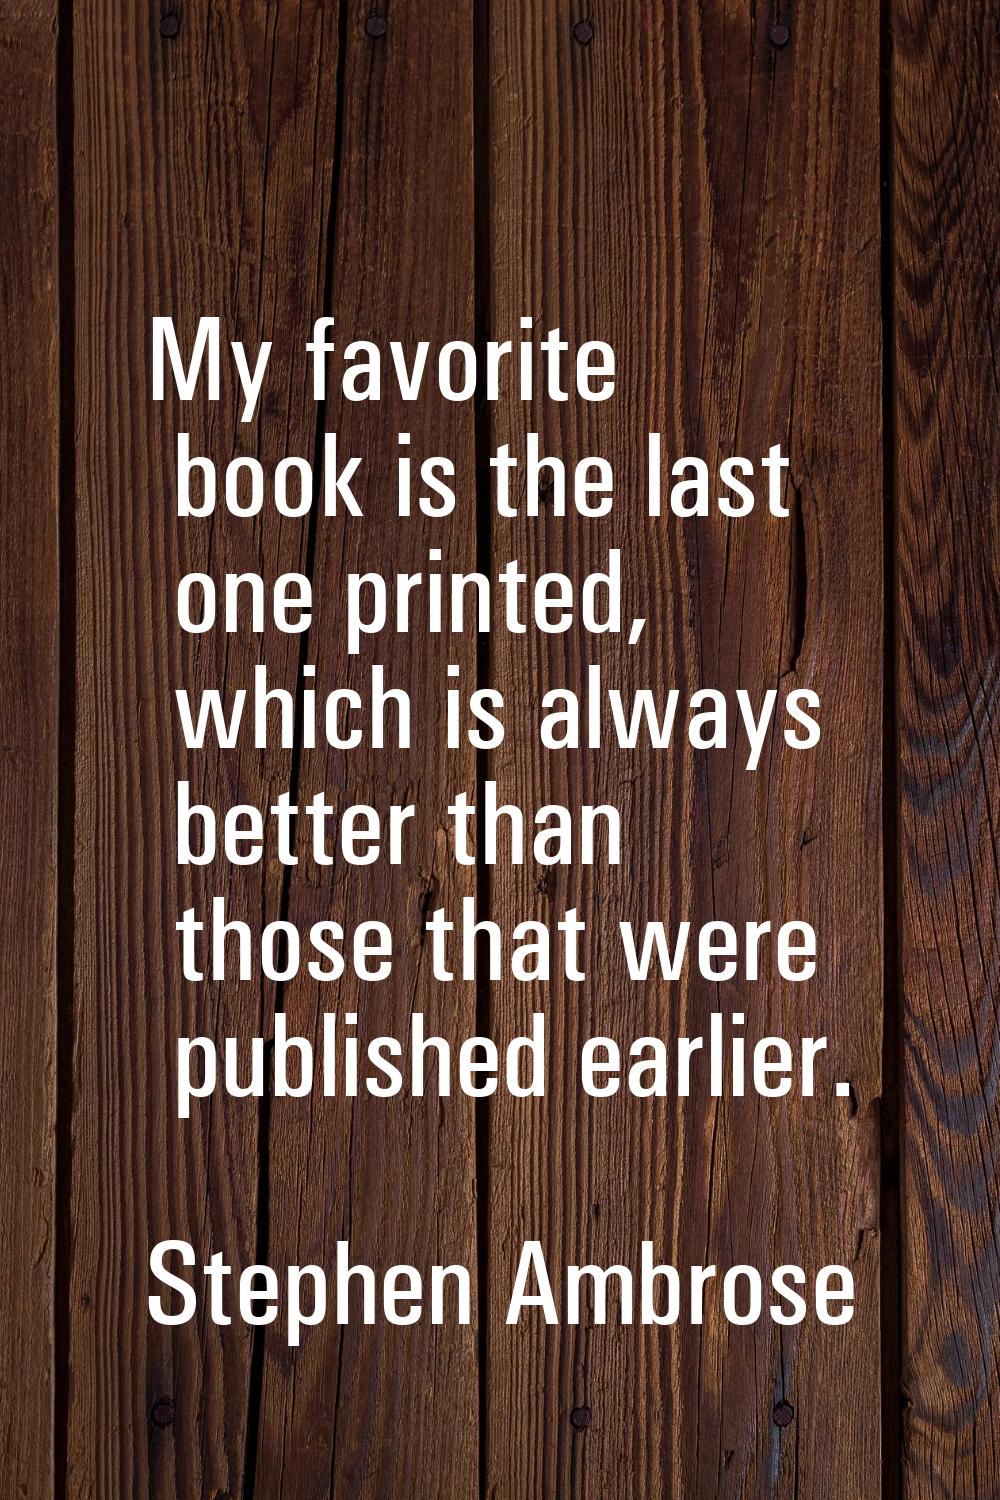 My favorite book is the last one printed, which is always better than those that were published ear